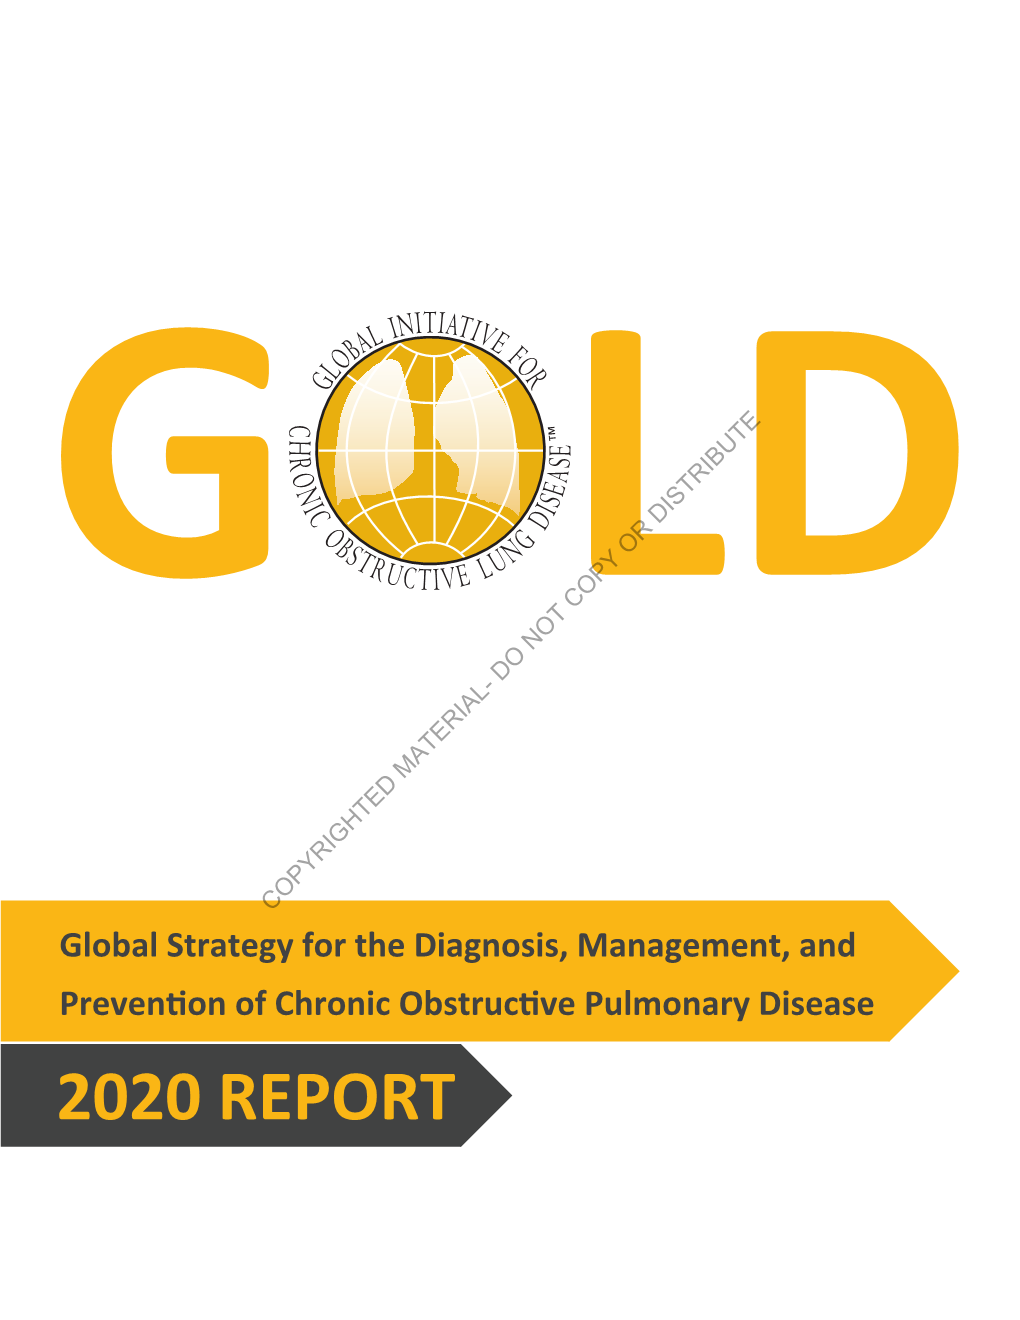 GOLD 2020 Revision the Basic Principles Remain the Same